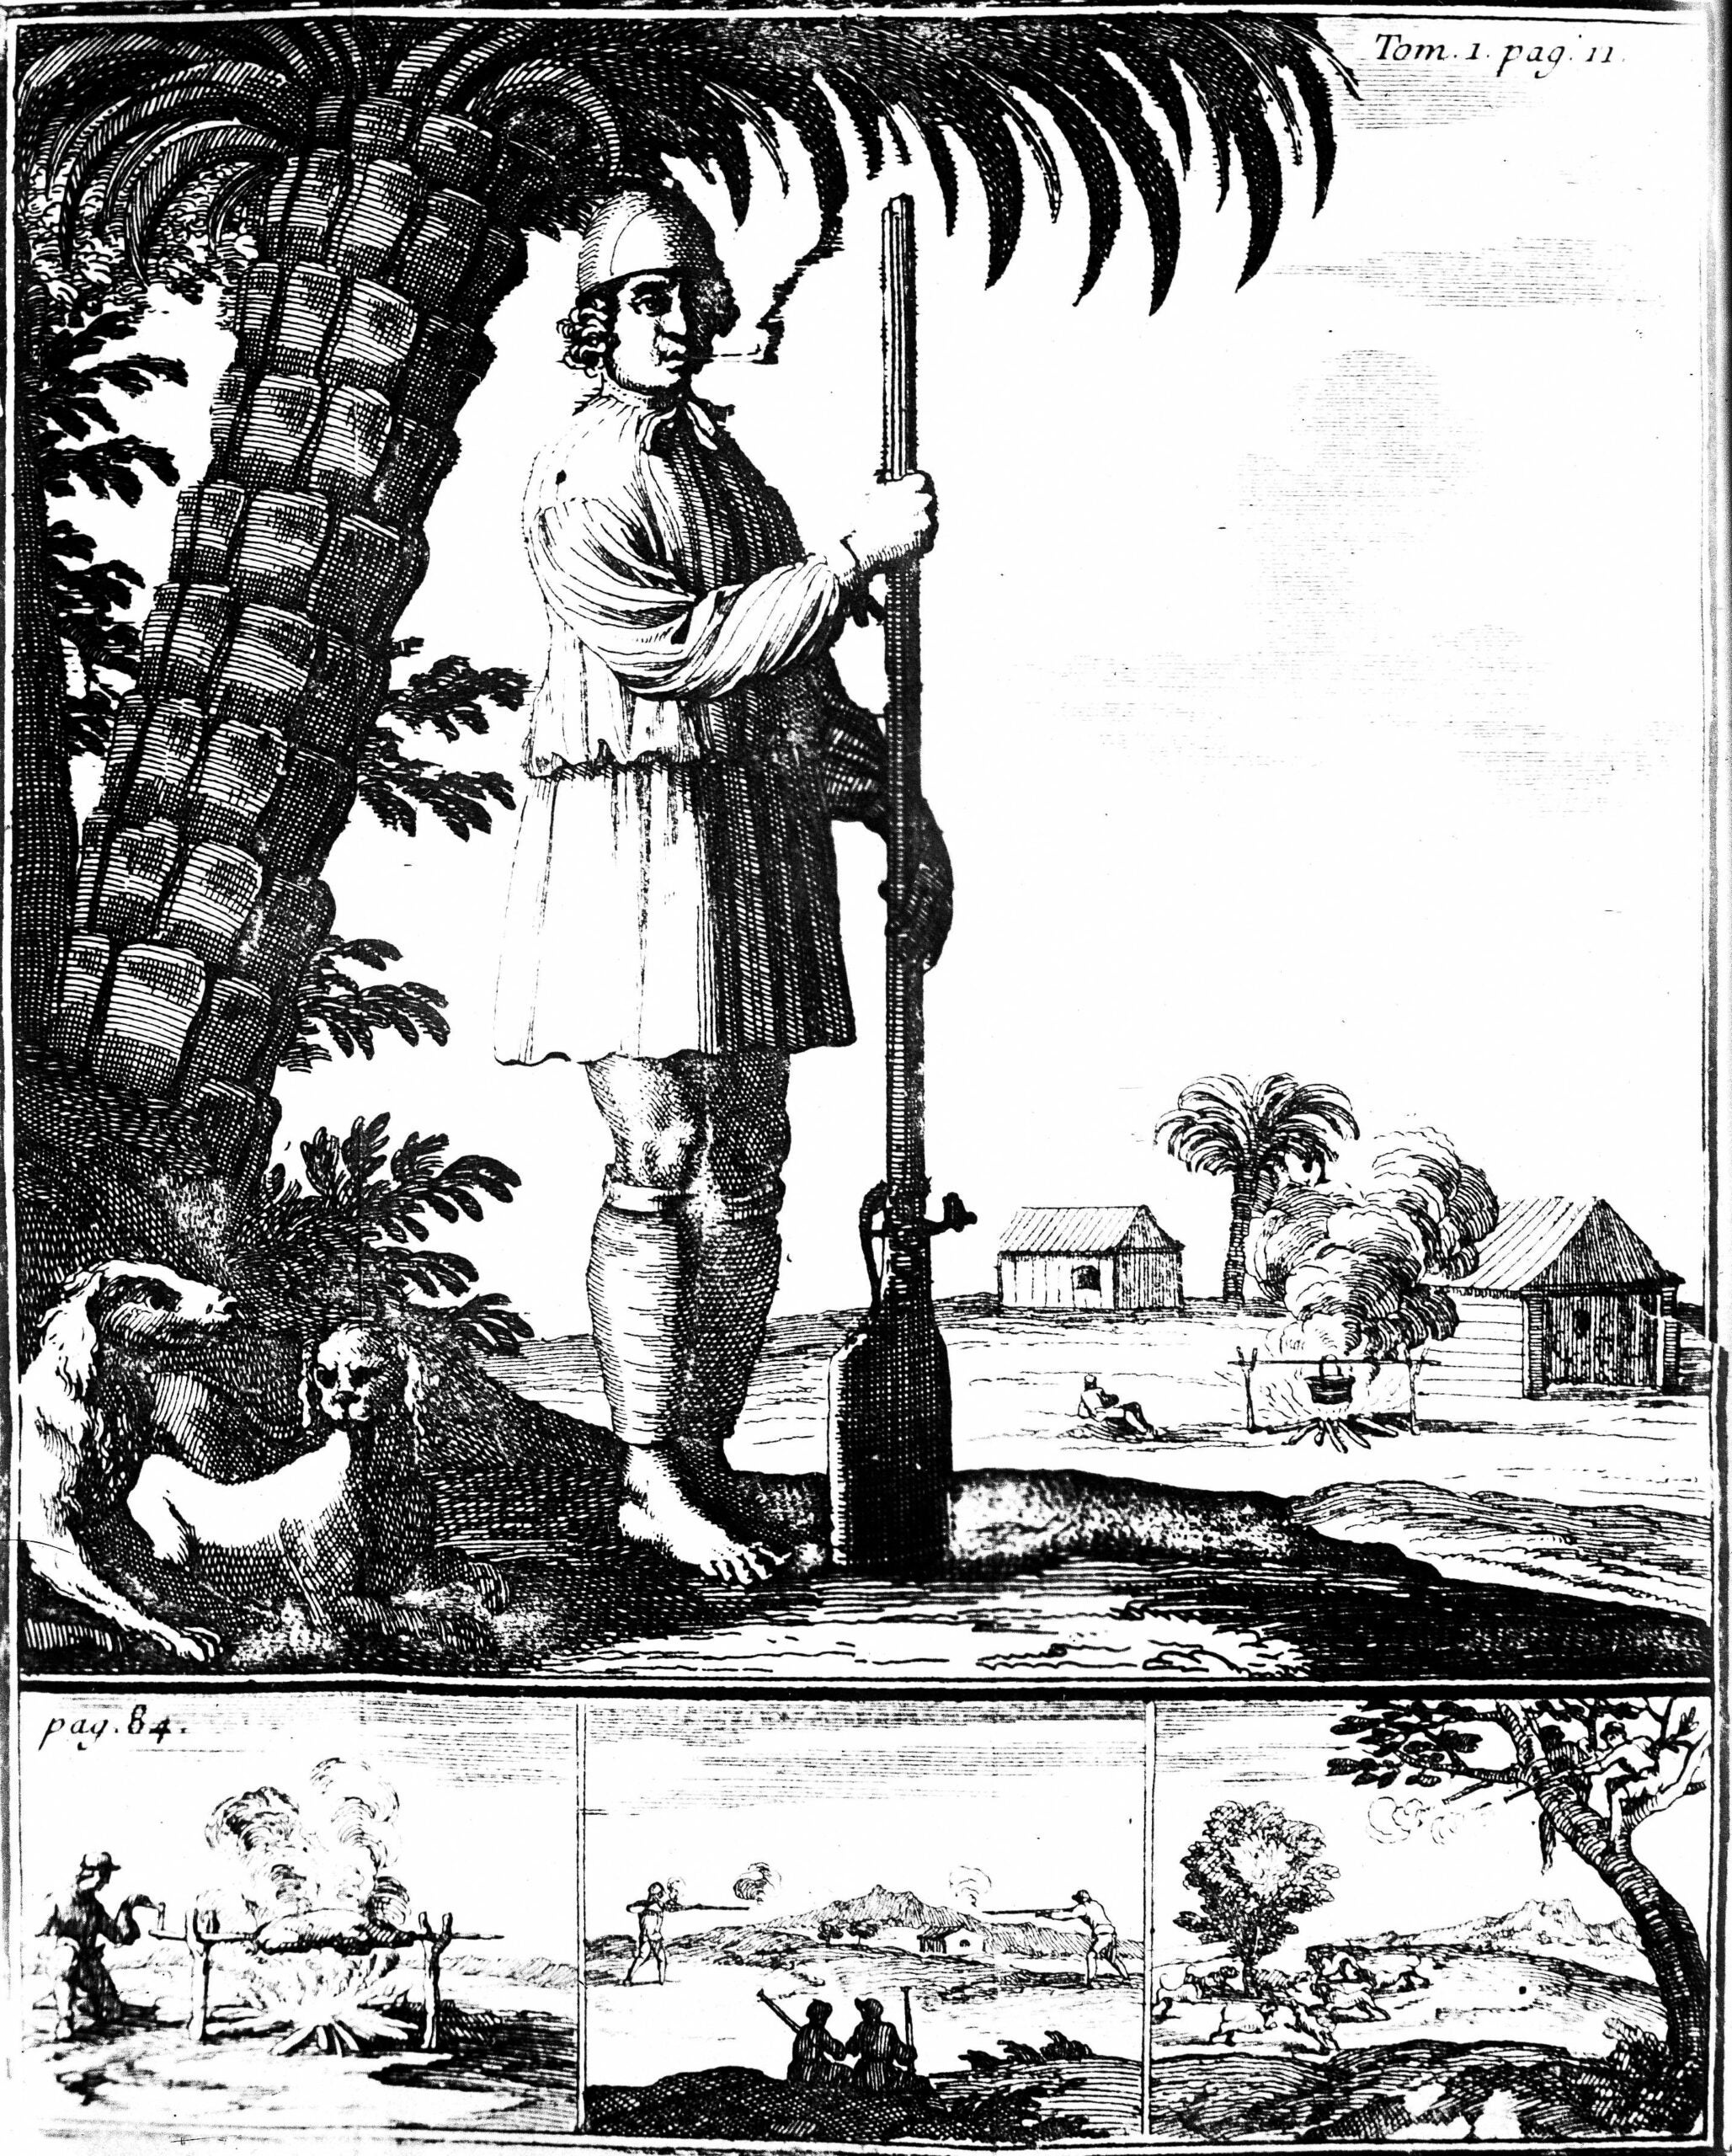 Engraving from a book by Alexandre Olivier Exquemelin depicts an unidentified Fench pirate as he stands with a long rifle, while three small pictures underneath depict various other scenes, 1600s. (Photo by Roger-Viollet/Getty Images)